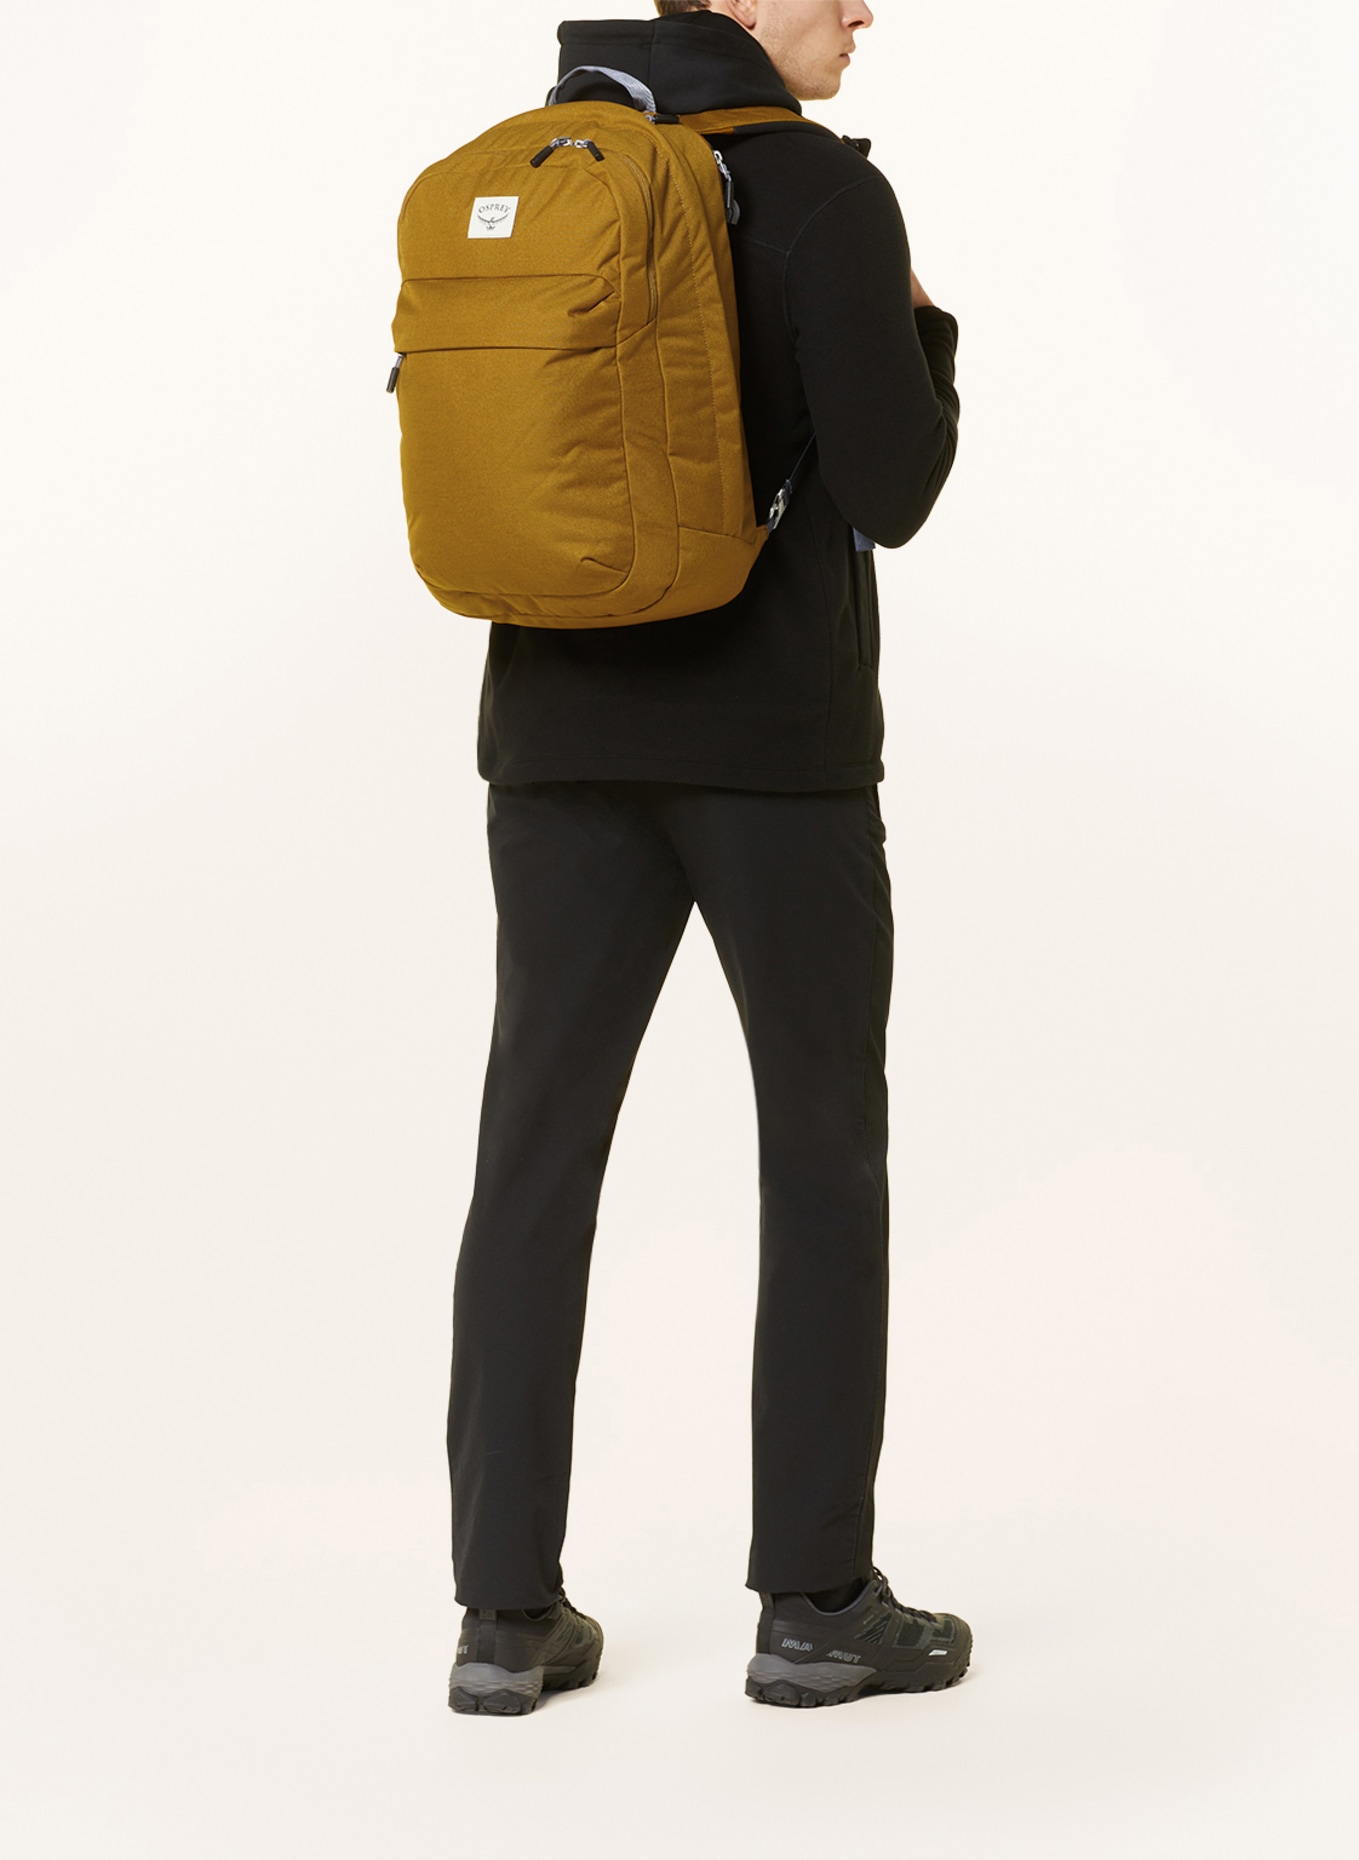 OSPREY Backpack ARCANE XL DAY 30 l with laptop compartment, Color: DARK YELLOW (Image 4)